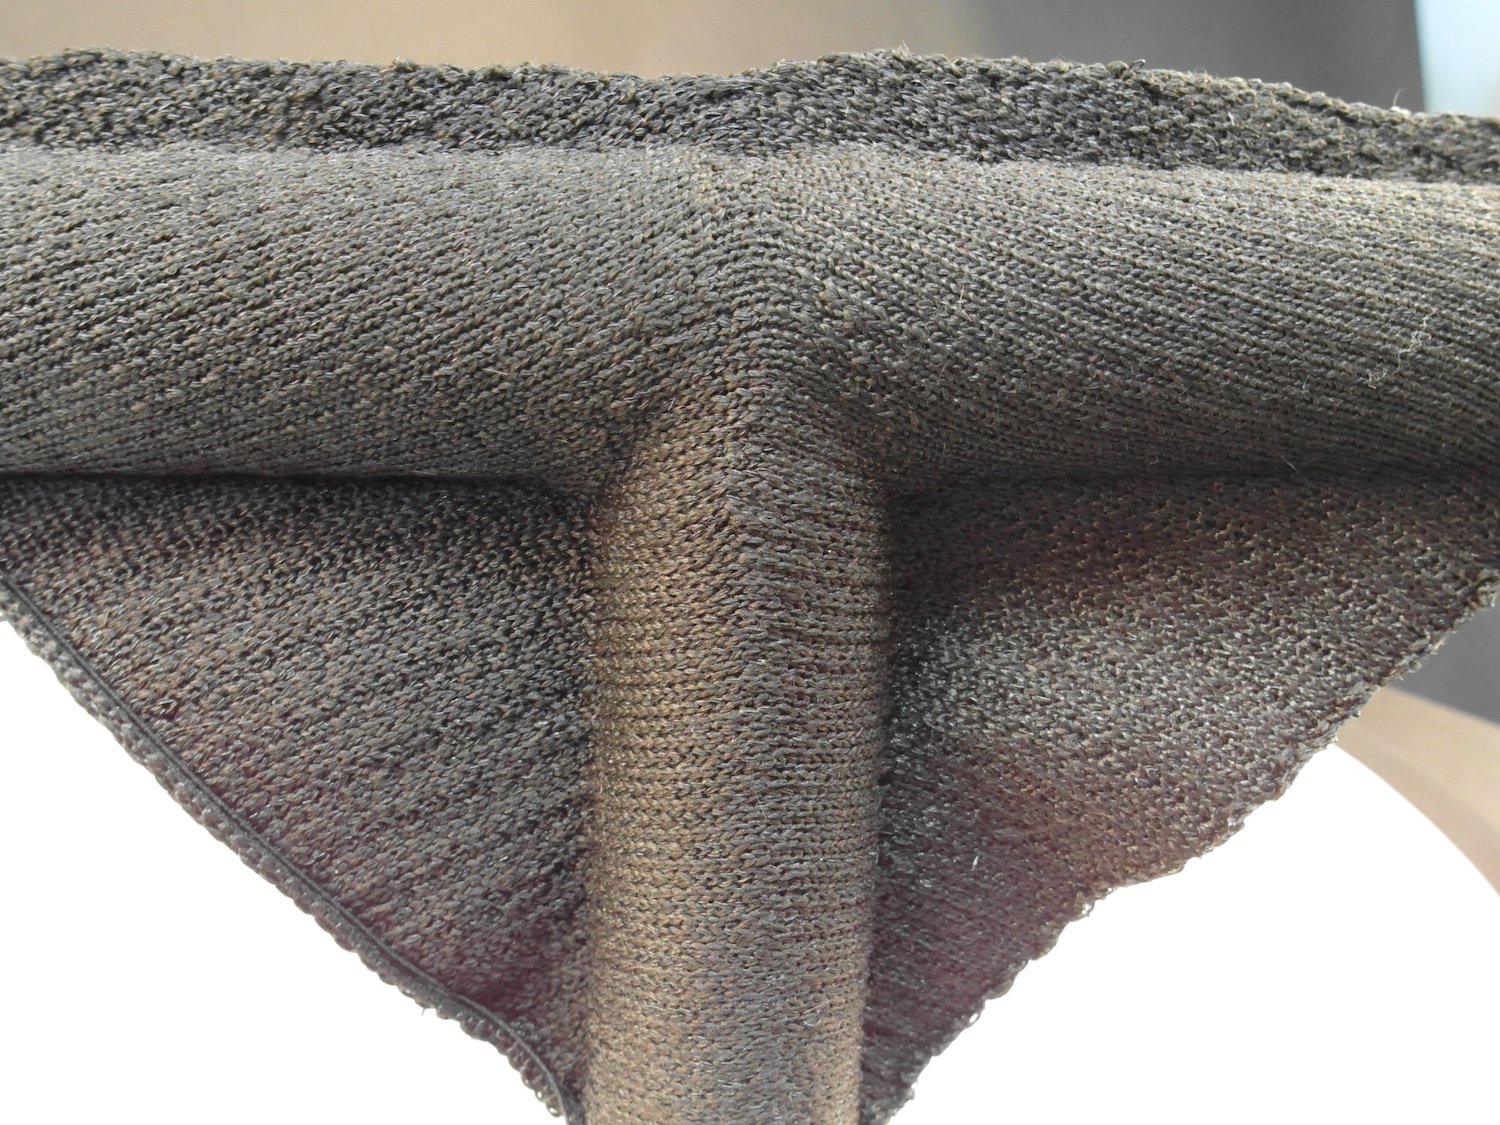 Knit-to-shape product knitted on a Stoll flat knitting machine. © Karl Mayer Group